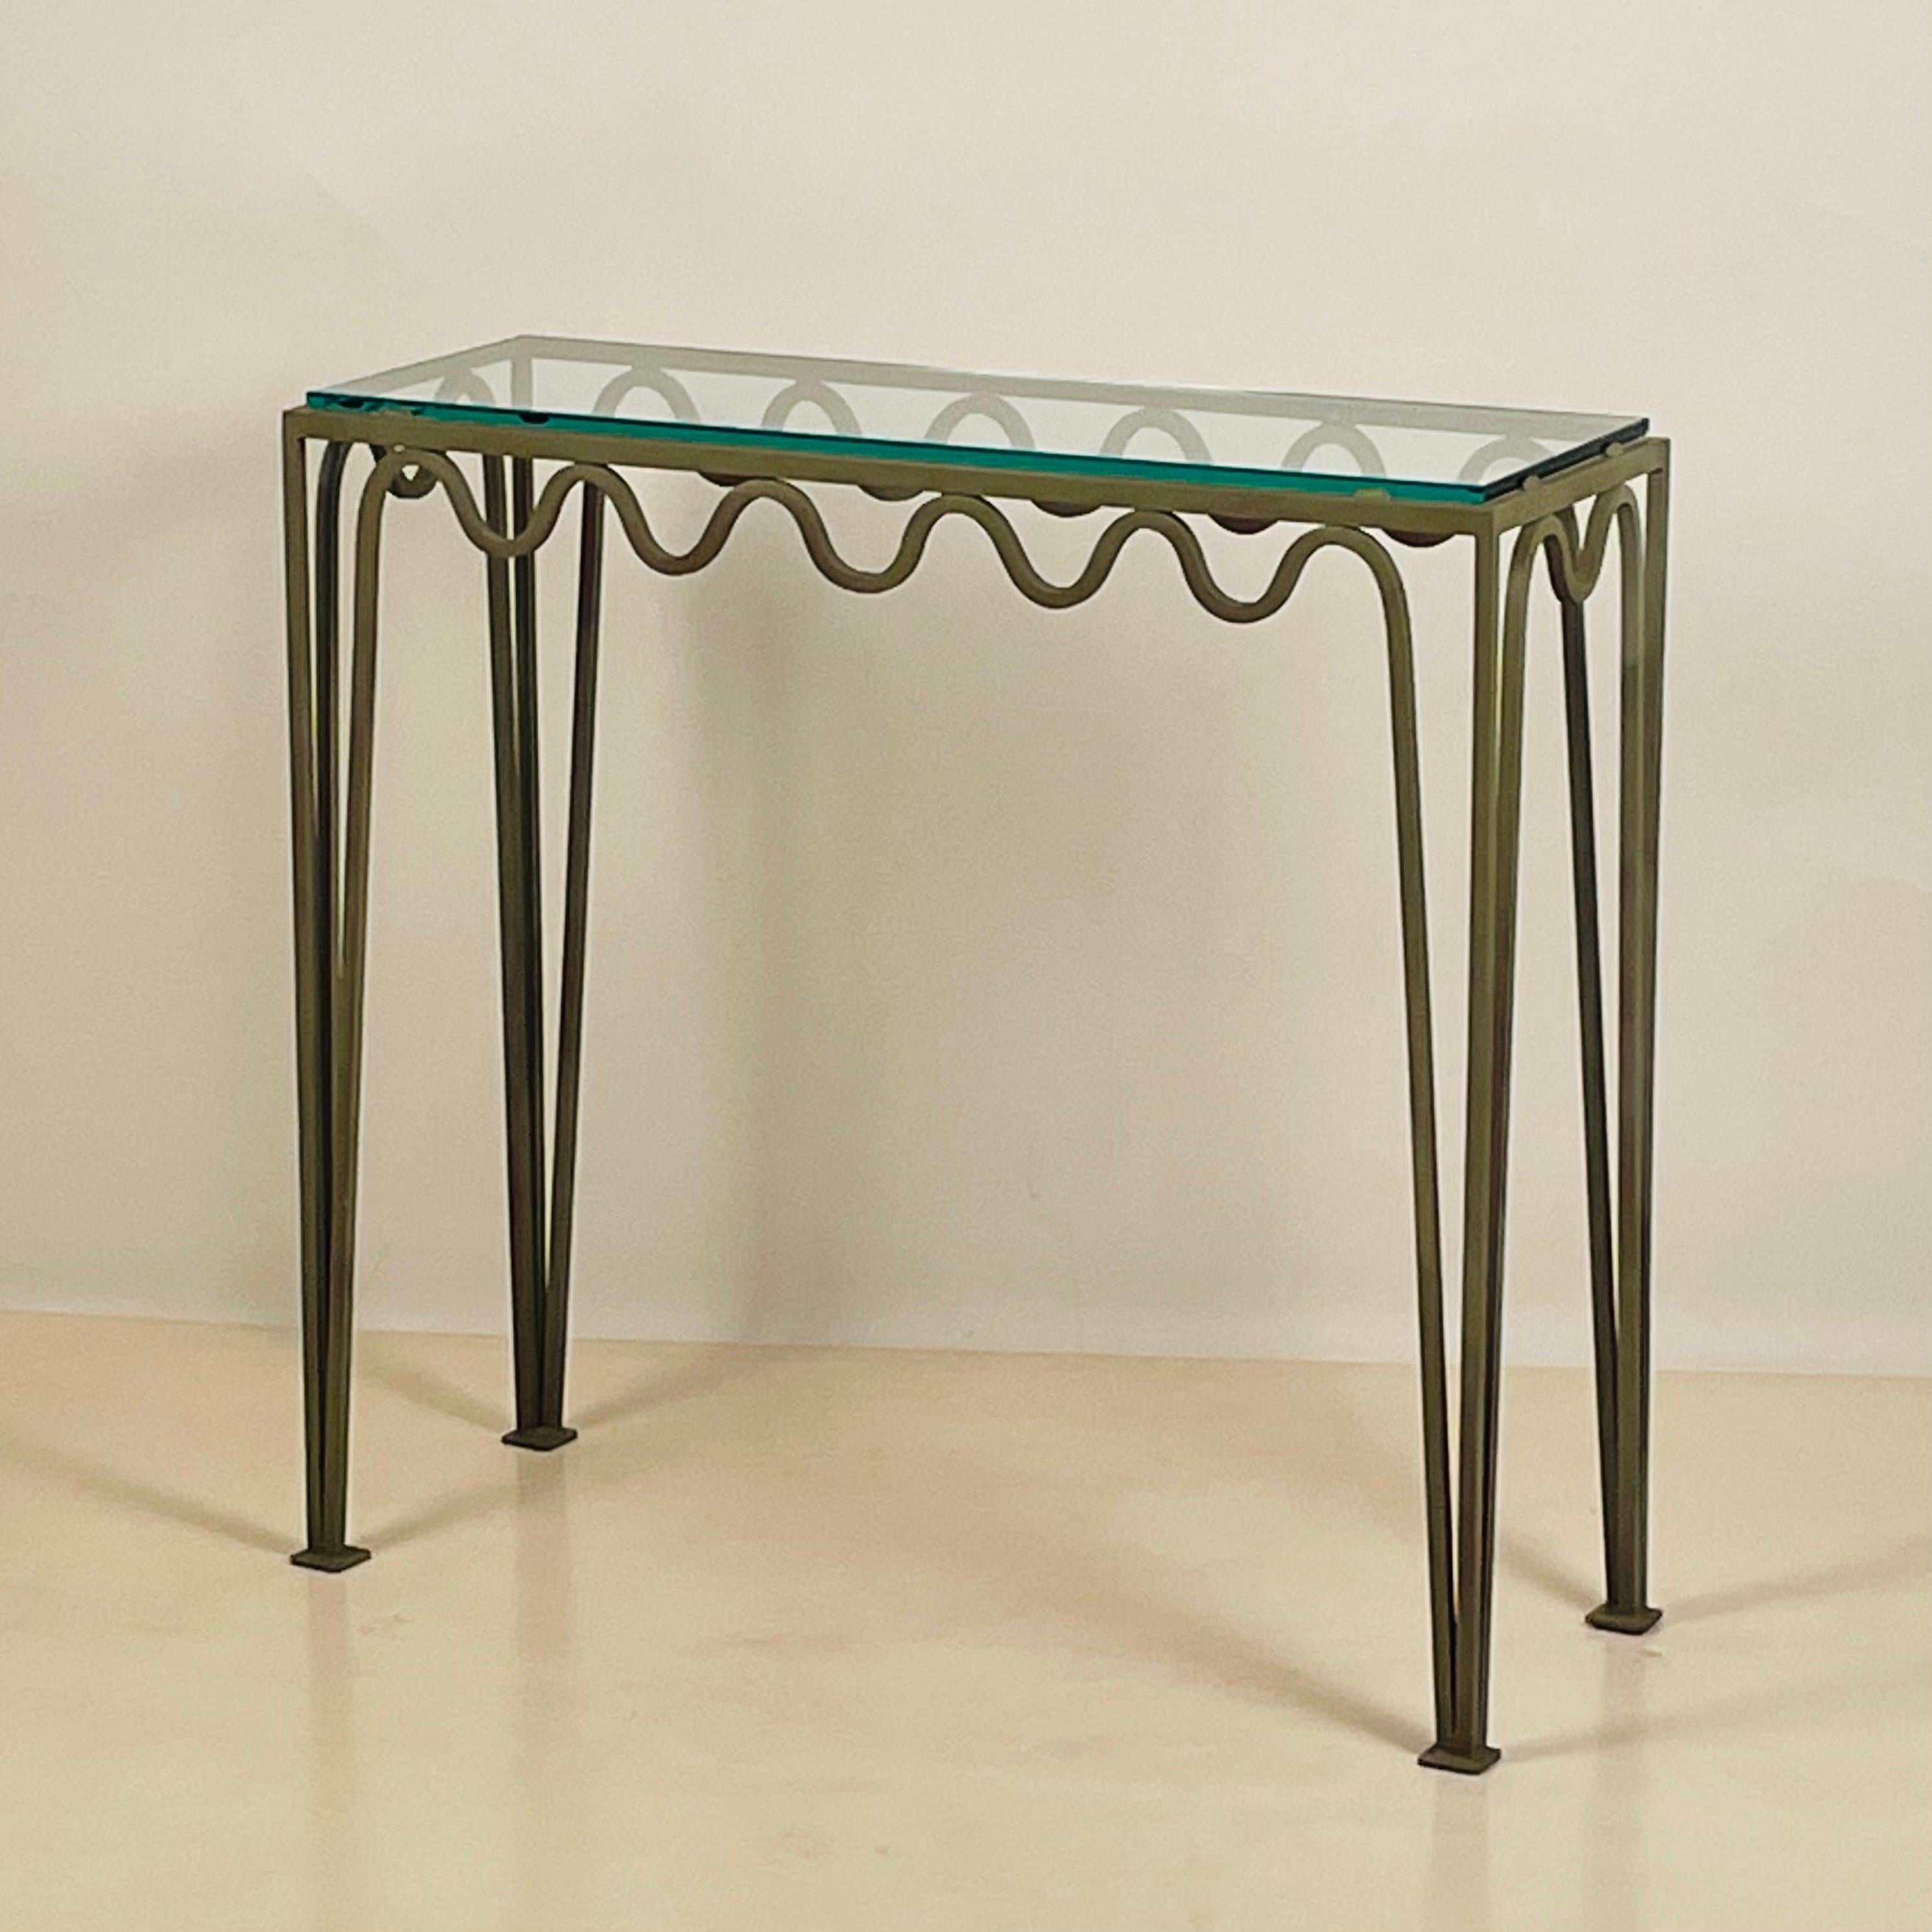 'Meandre' verdigris and glass console by Design Frères.

Chic and understated.